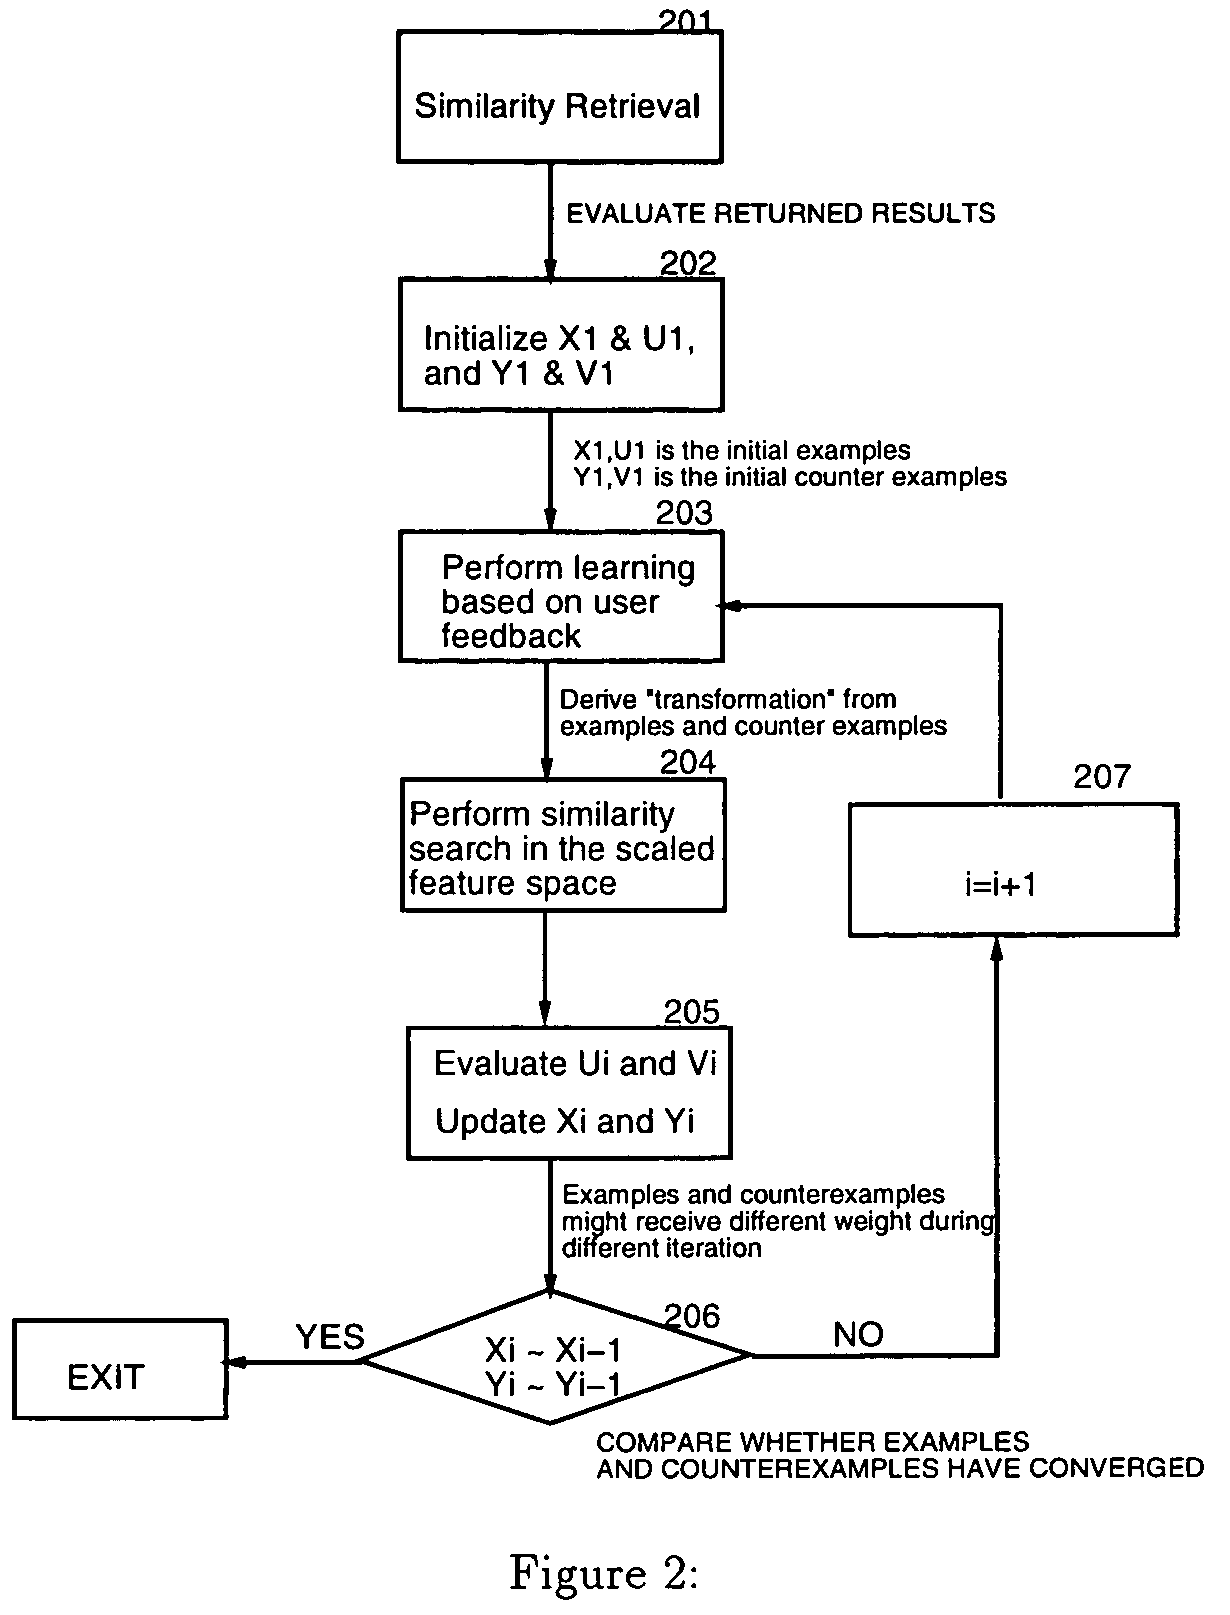 Method and apparatus for similarity retrieval from iterative refinement